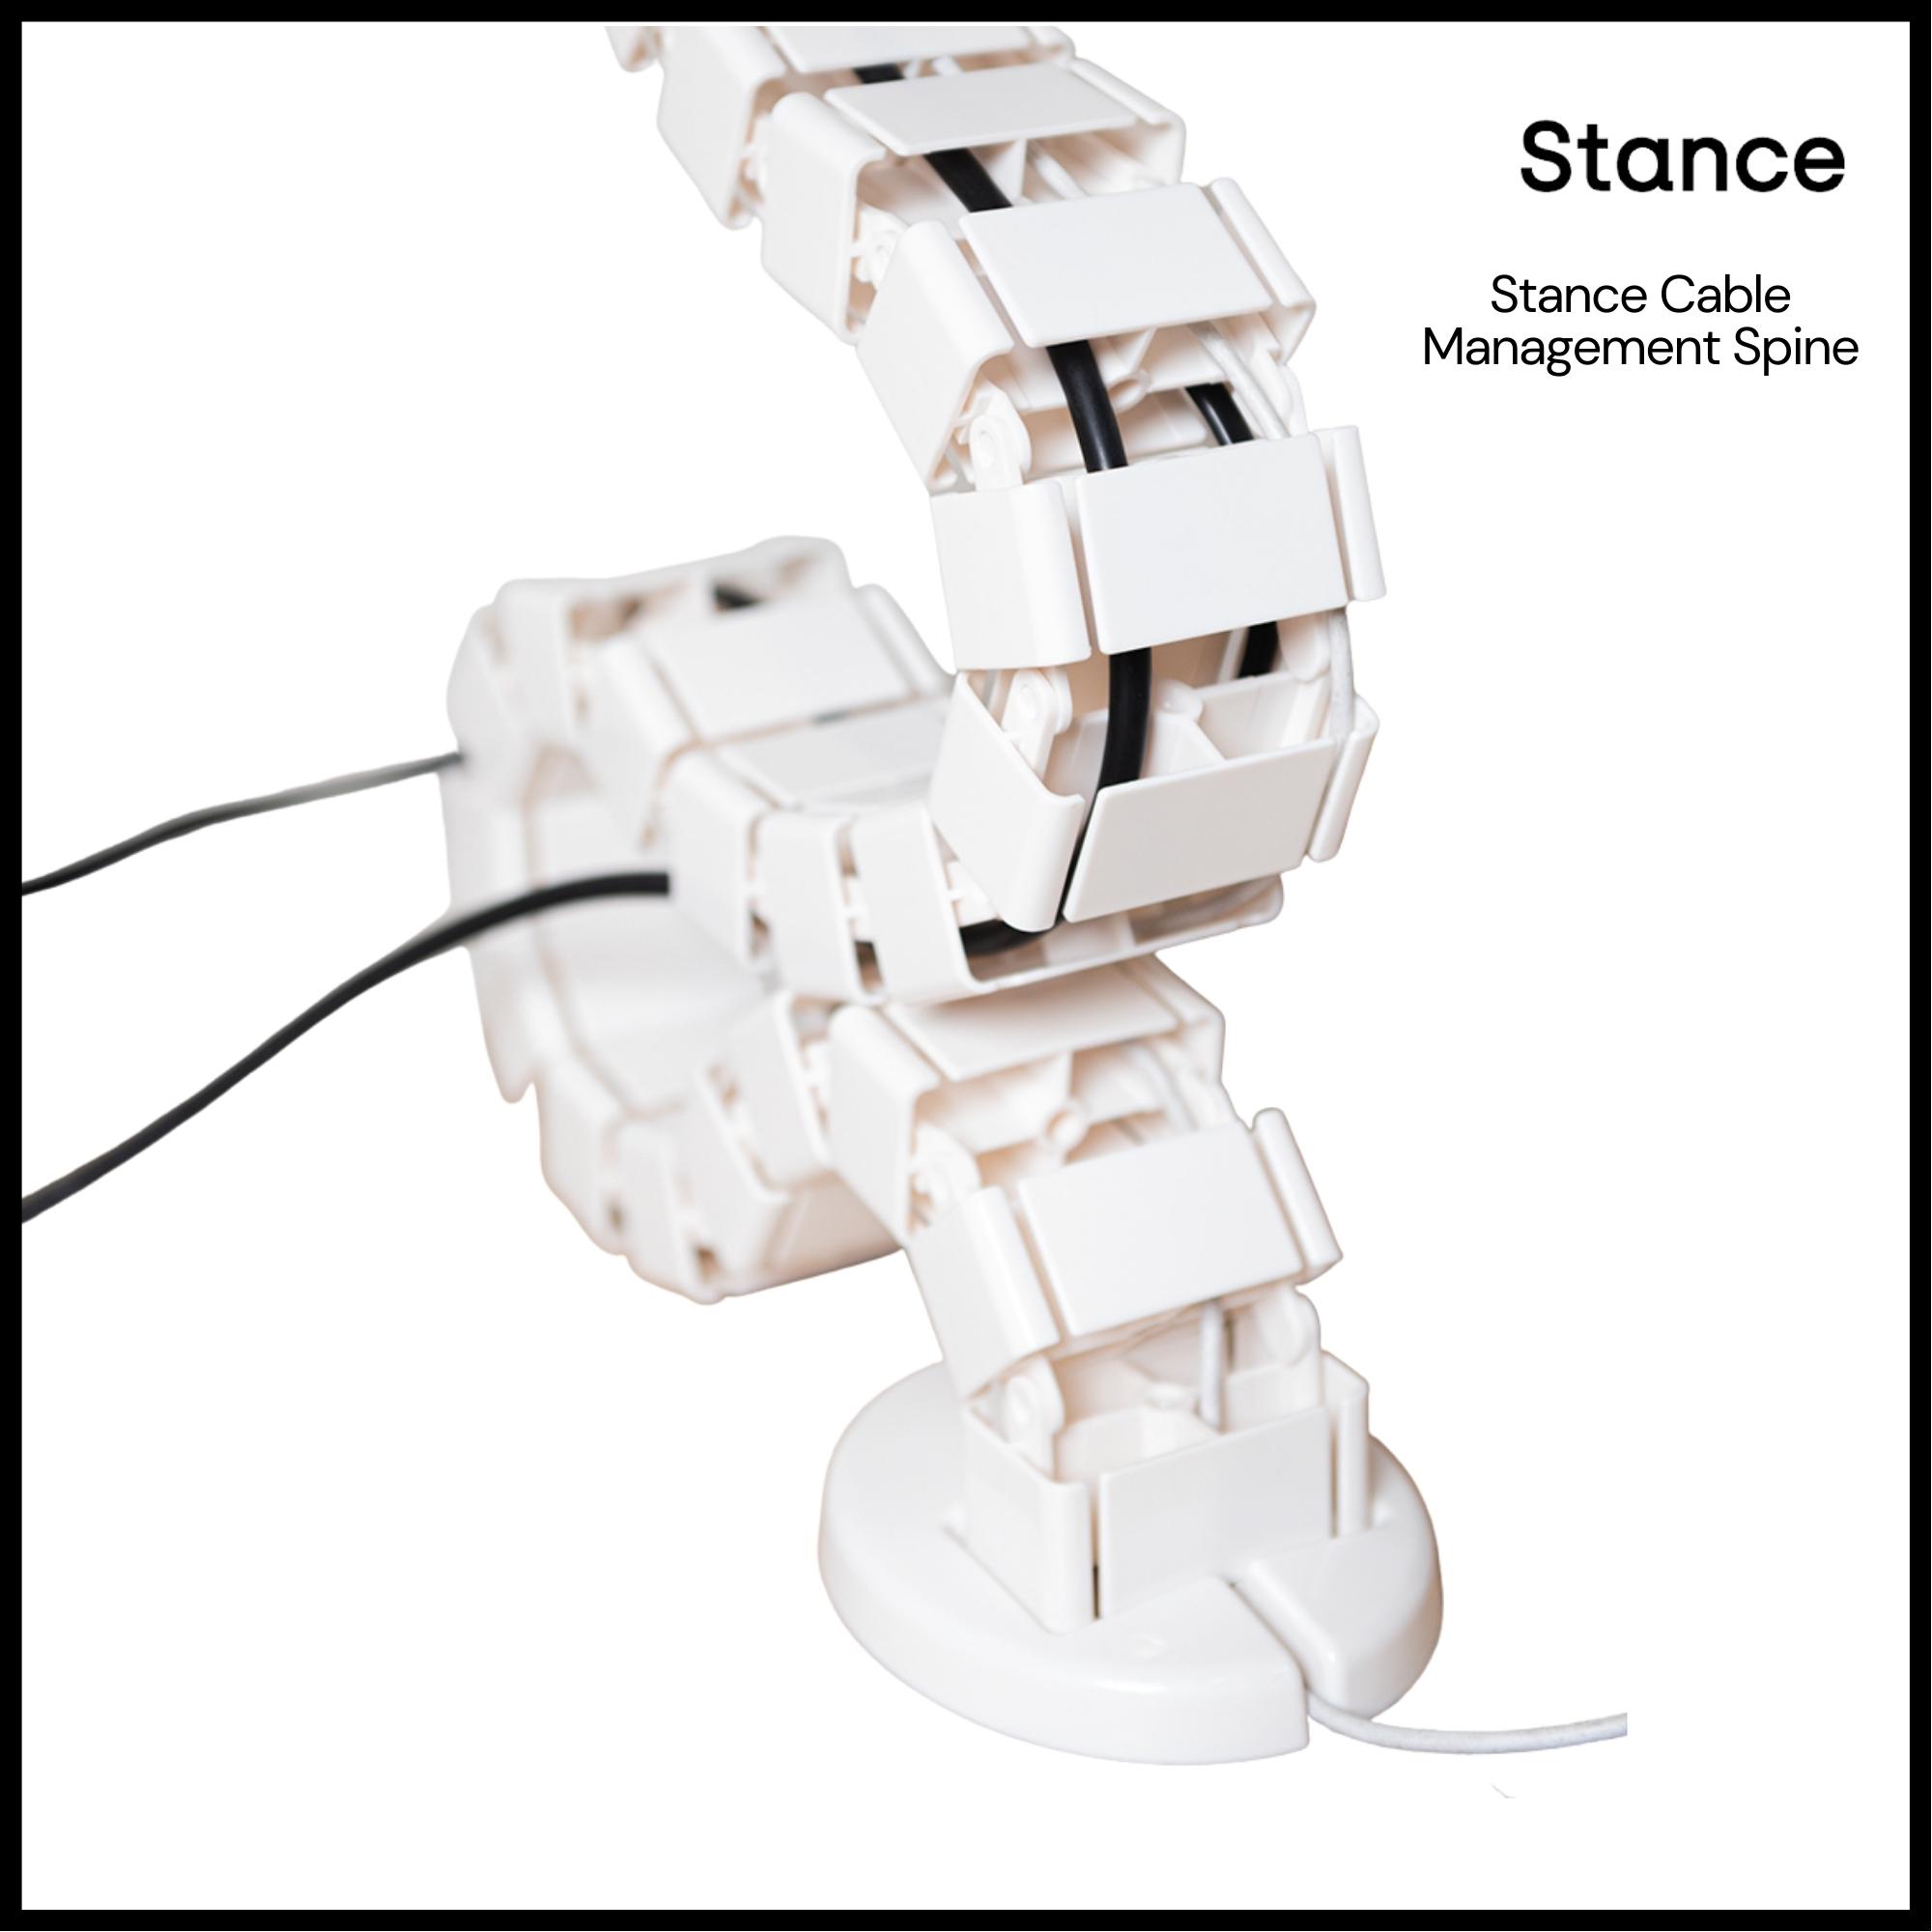 Stance Cable Management Spine — stancephilippines